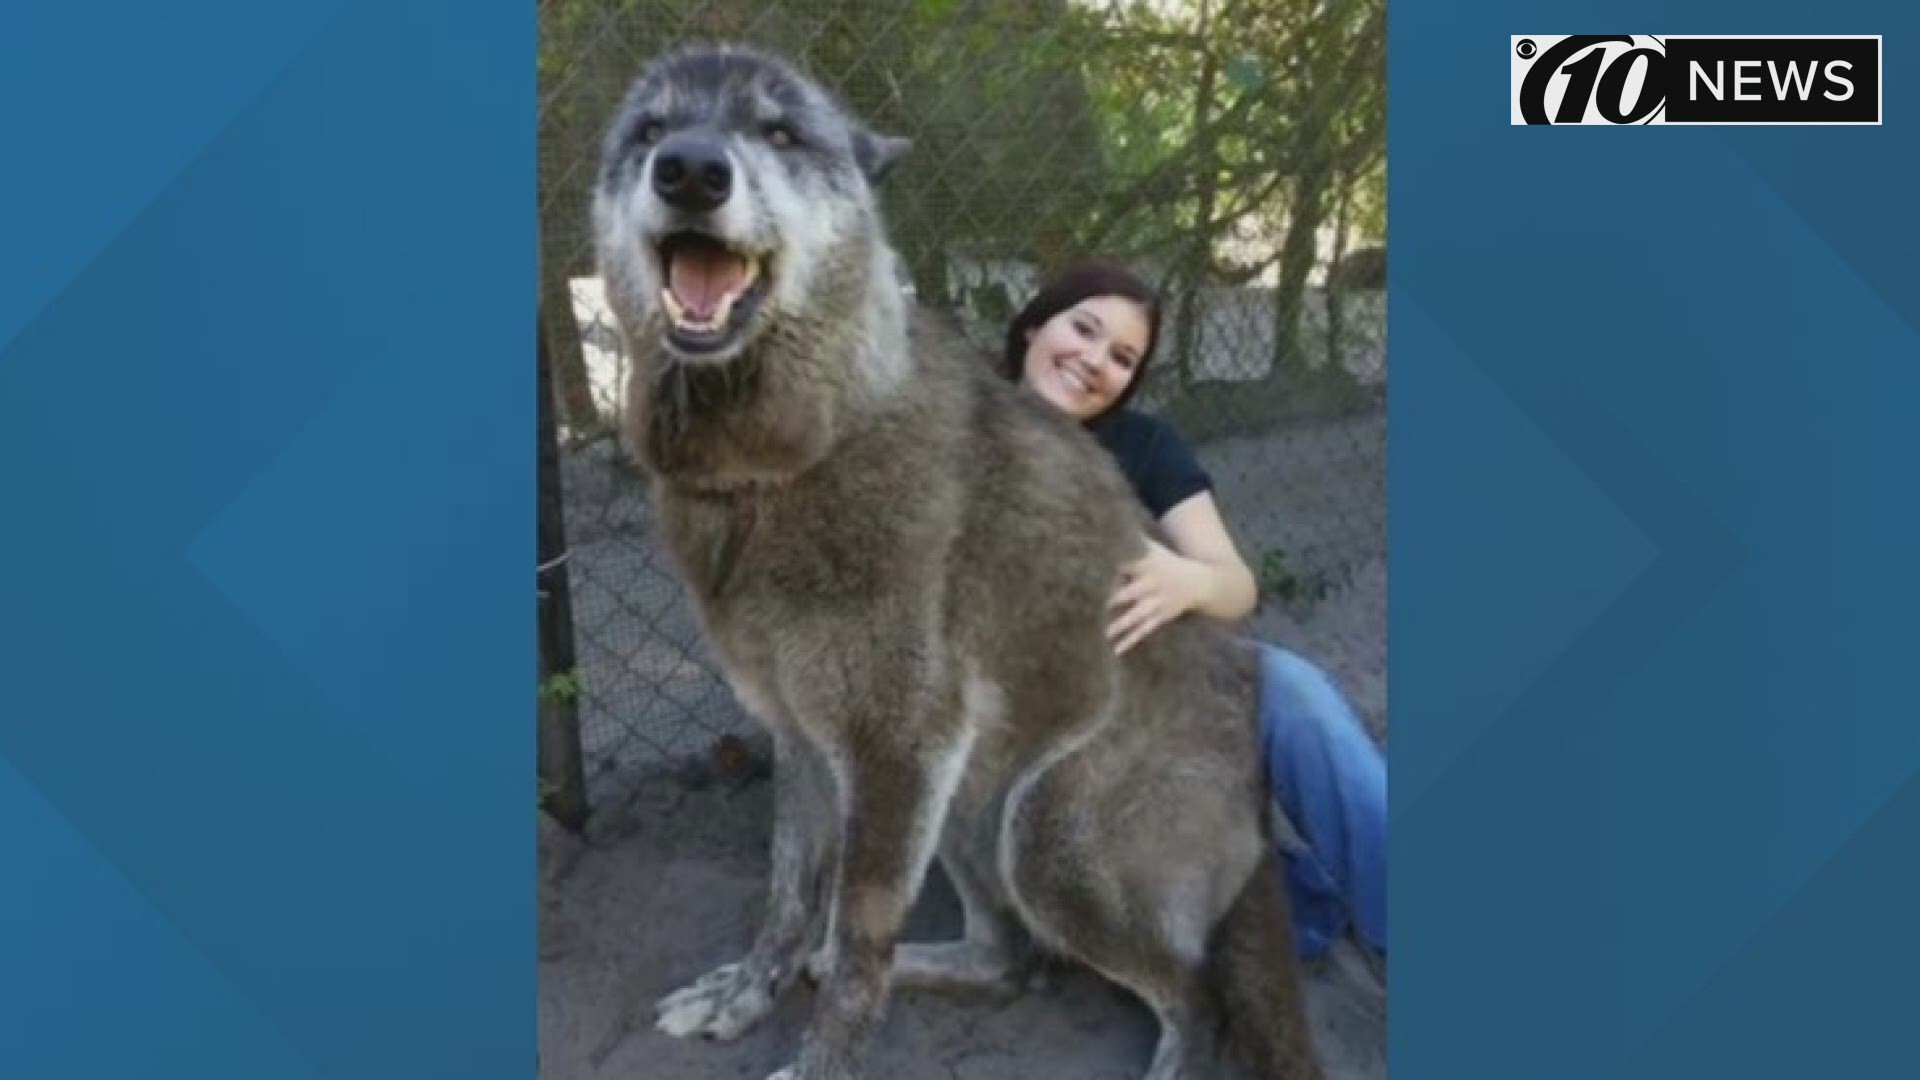 In the case of the Shy Wolf Sanctuary, there's nothing to be alarmed of: The wolves are supposed to be there. Resident Yuki the wolf-dog, in particular, has gained much notoriety and recent worldwide attention.